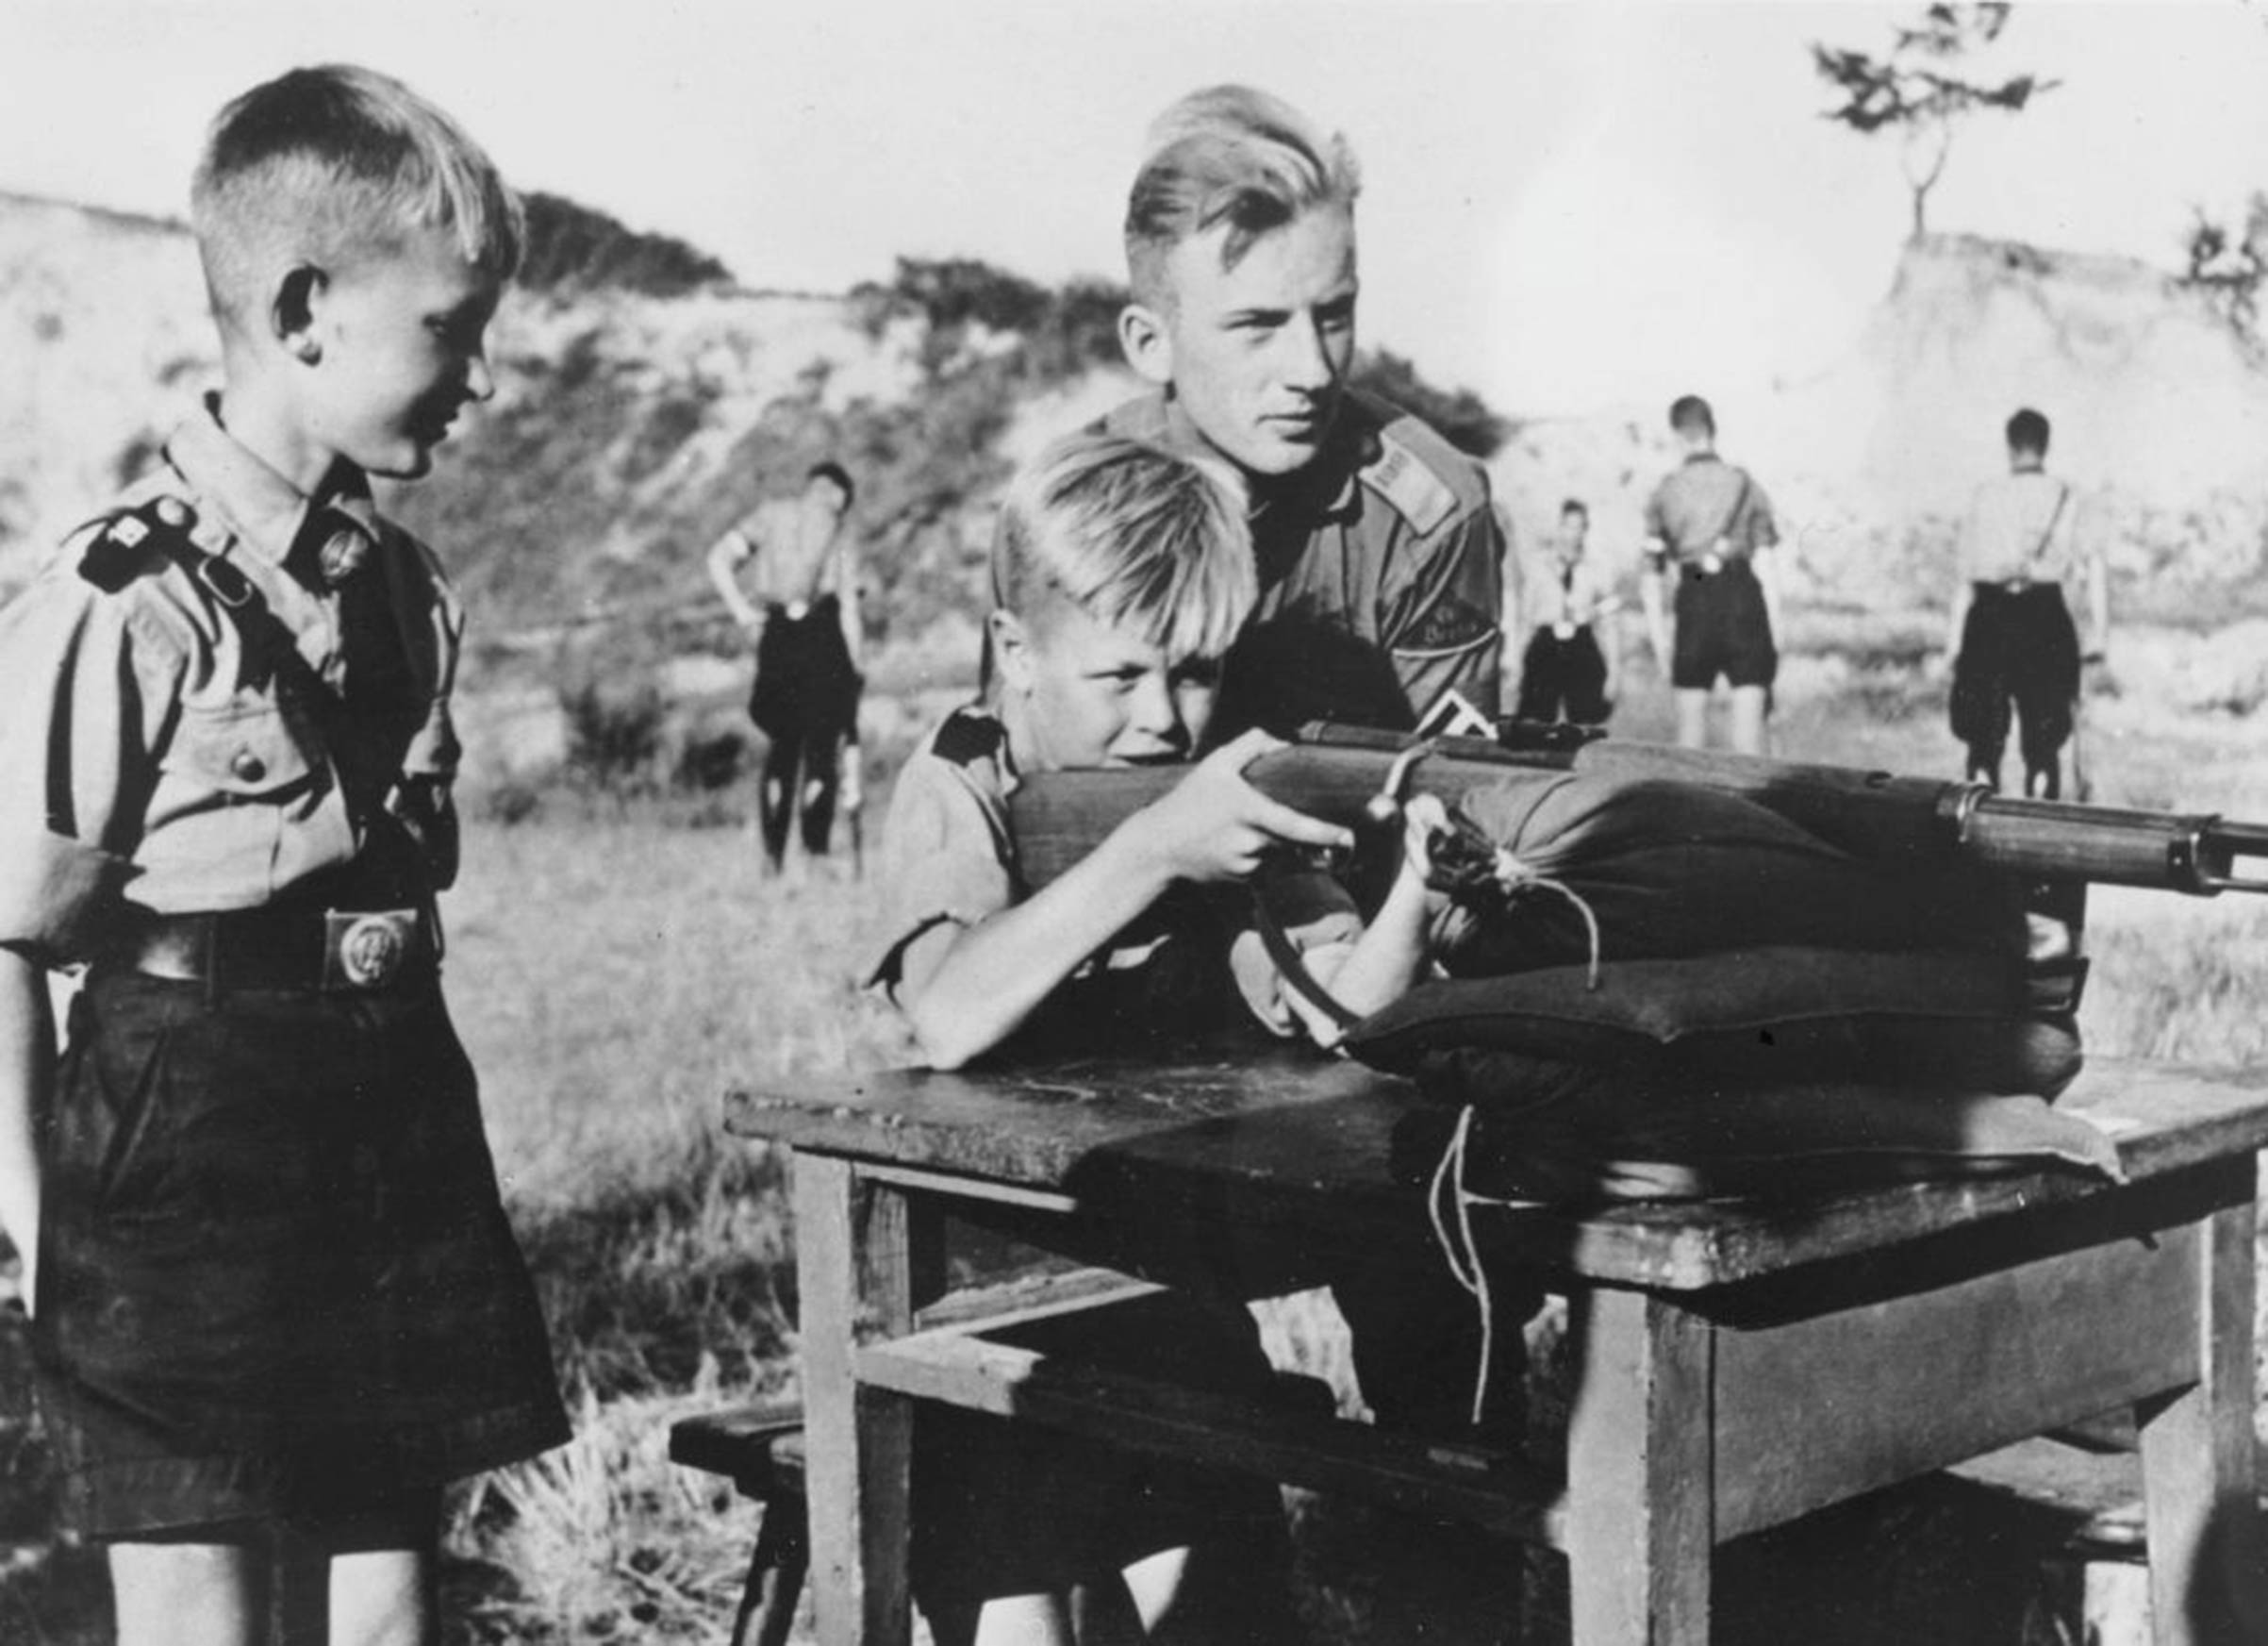 Eleven-year-old boys in the Hitler Youth organization learning how to fire a rifle. (Keystone—Getty Images)